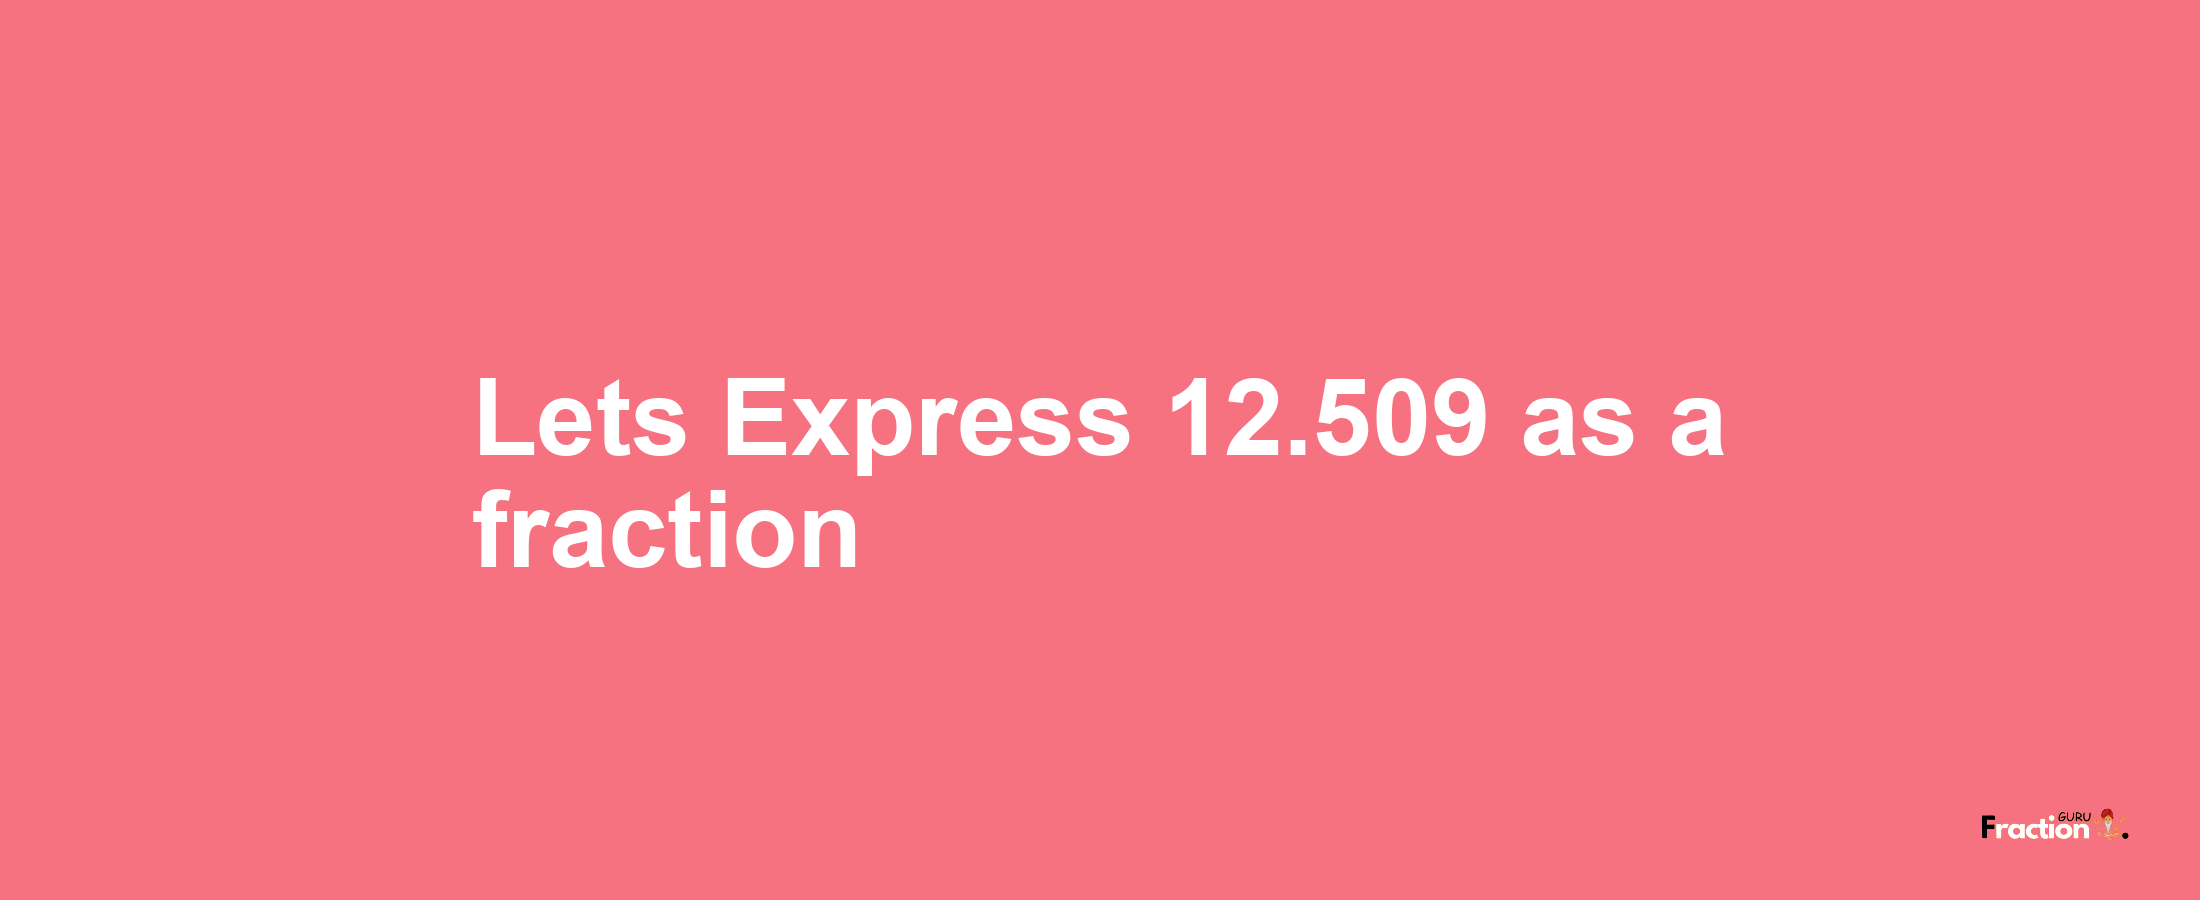 Lets Express 12.509 as afraction